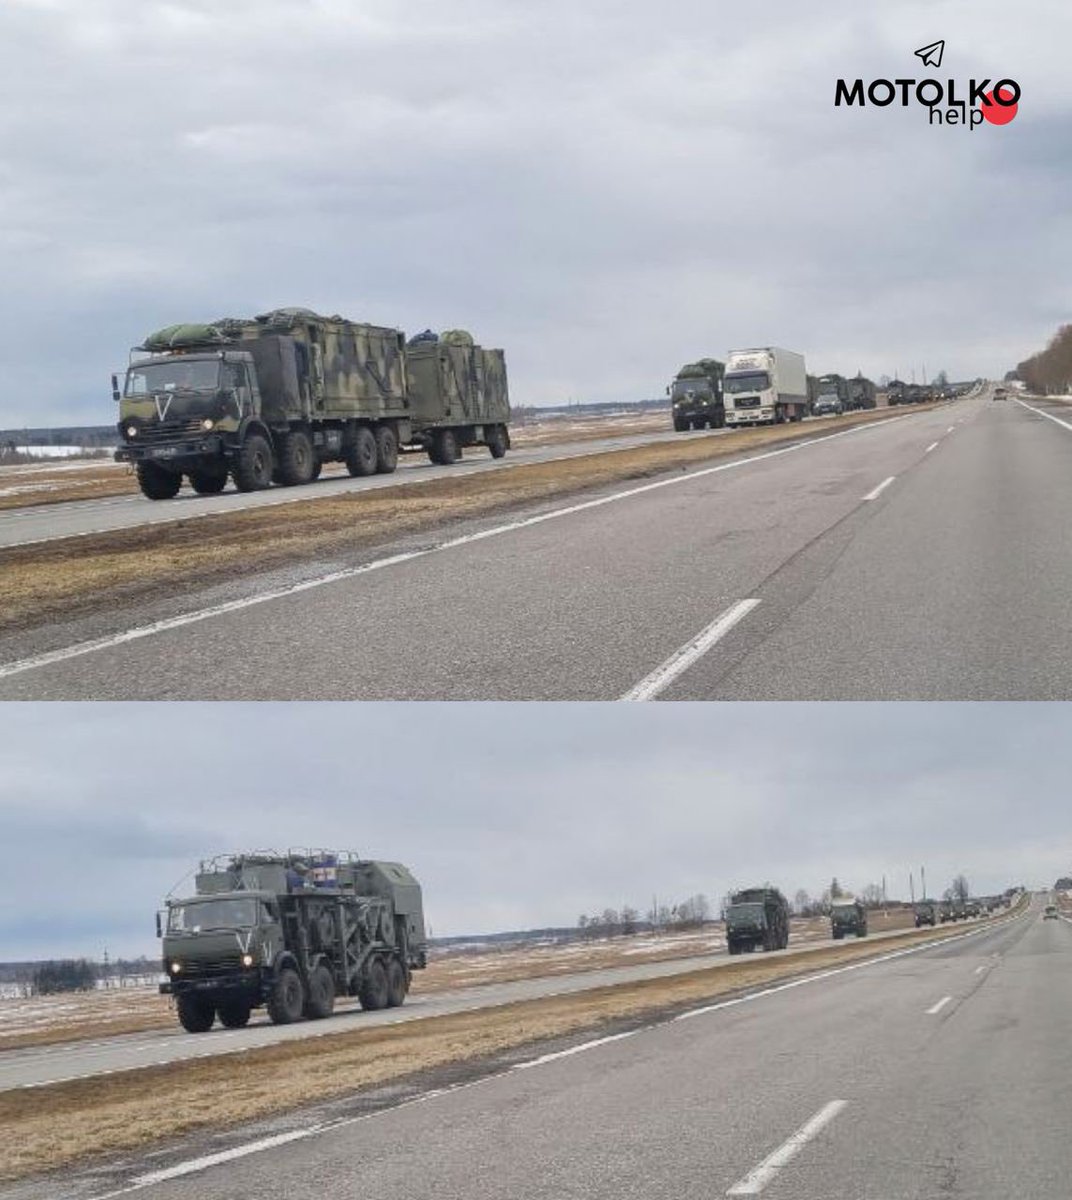 Movement of columns of Russian equipment from 13:00 to 14:30  13:30. A large column of about 50 Russian vehicles with V marks was moving from Talochyn towards Orsha (Vitebsk region) along the M1 highway